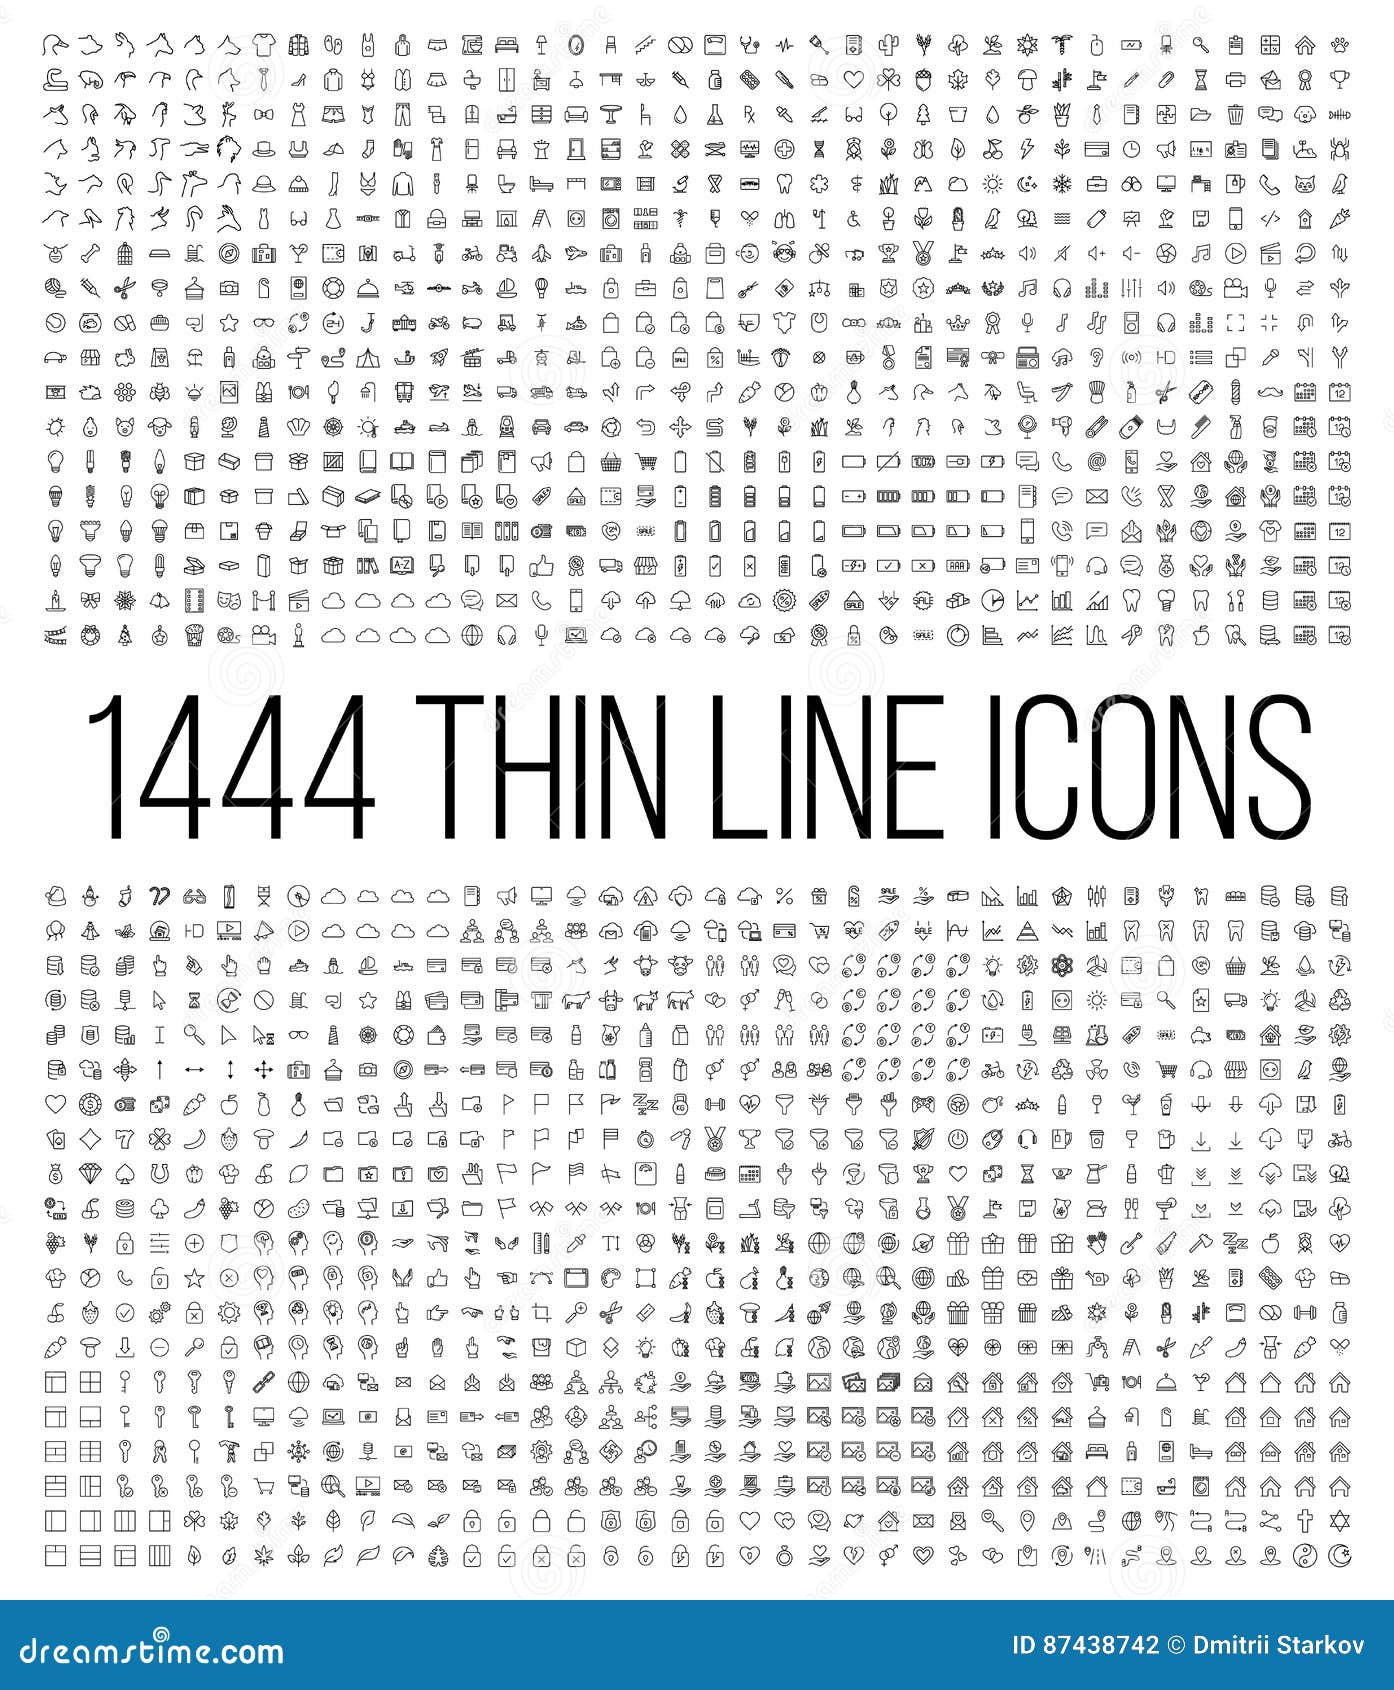 exclusive 1444 thin line icons set.